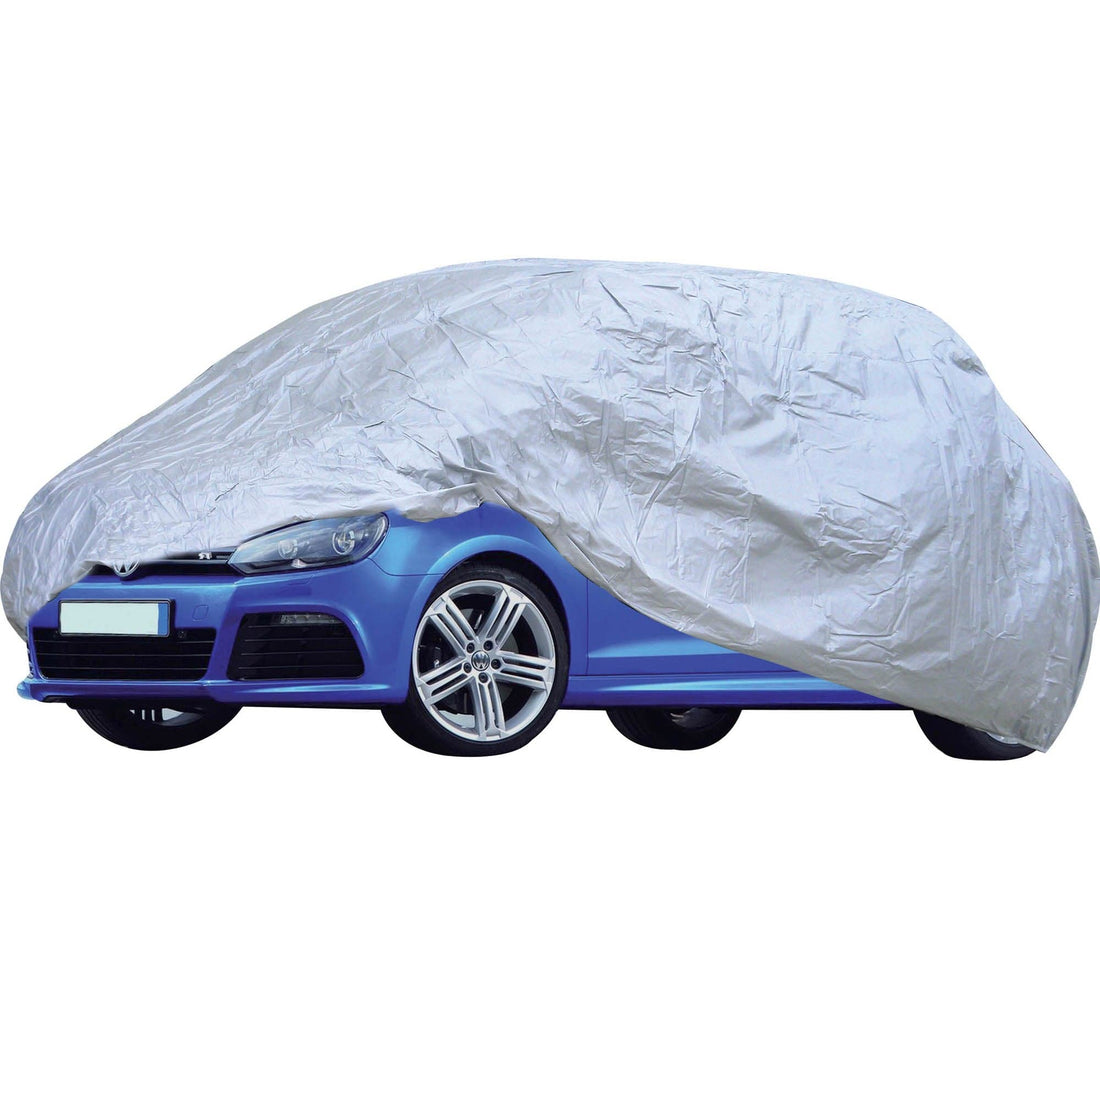 WATERPROOF CAR COVER SIZE L